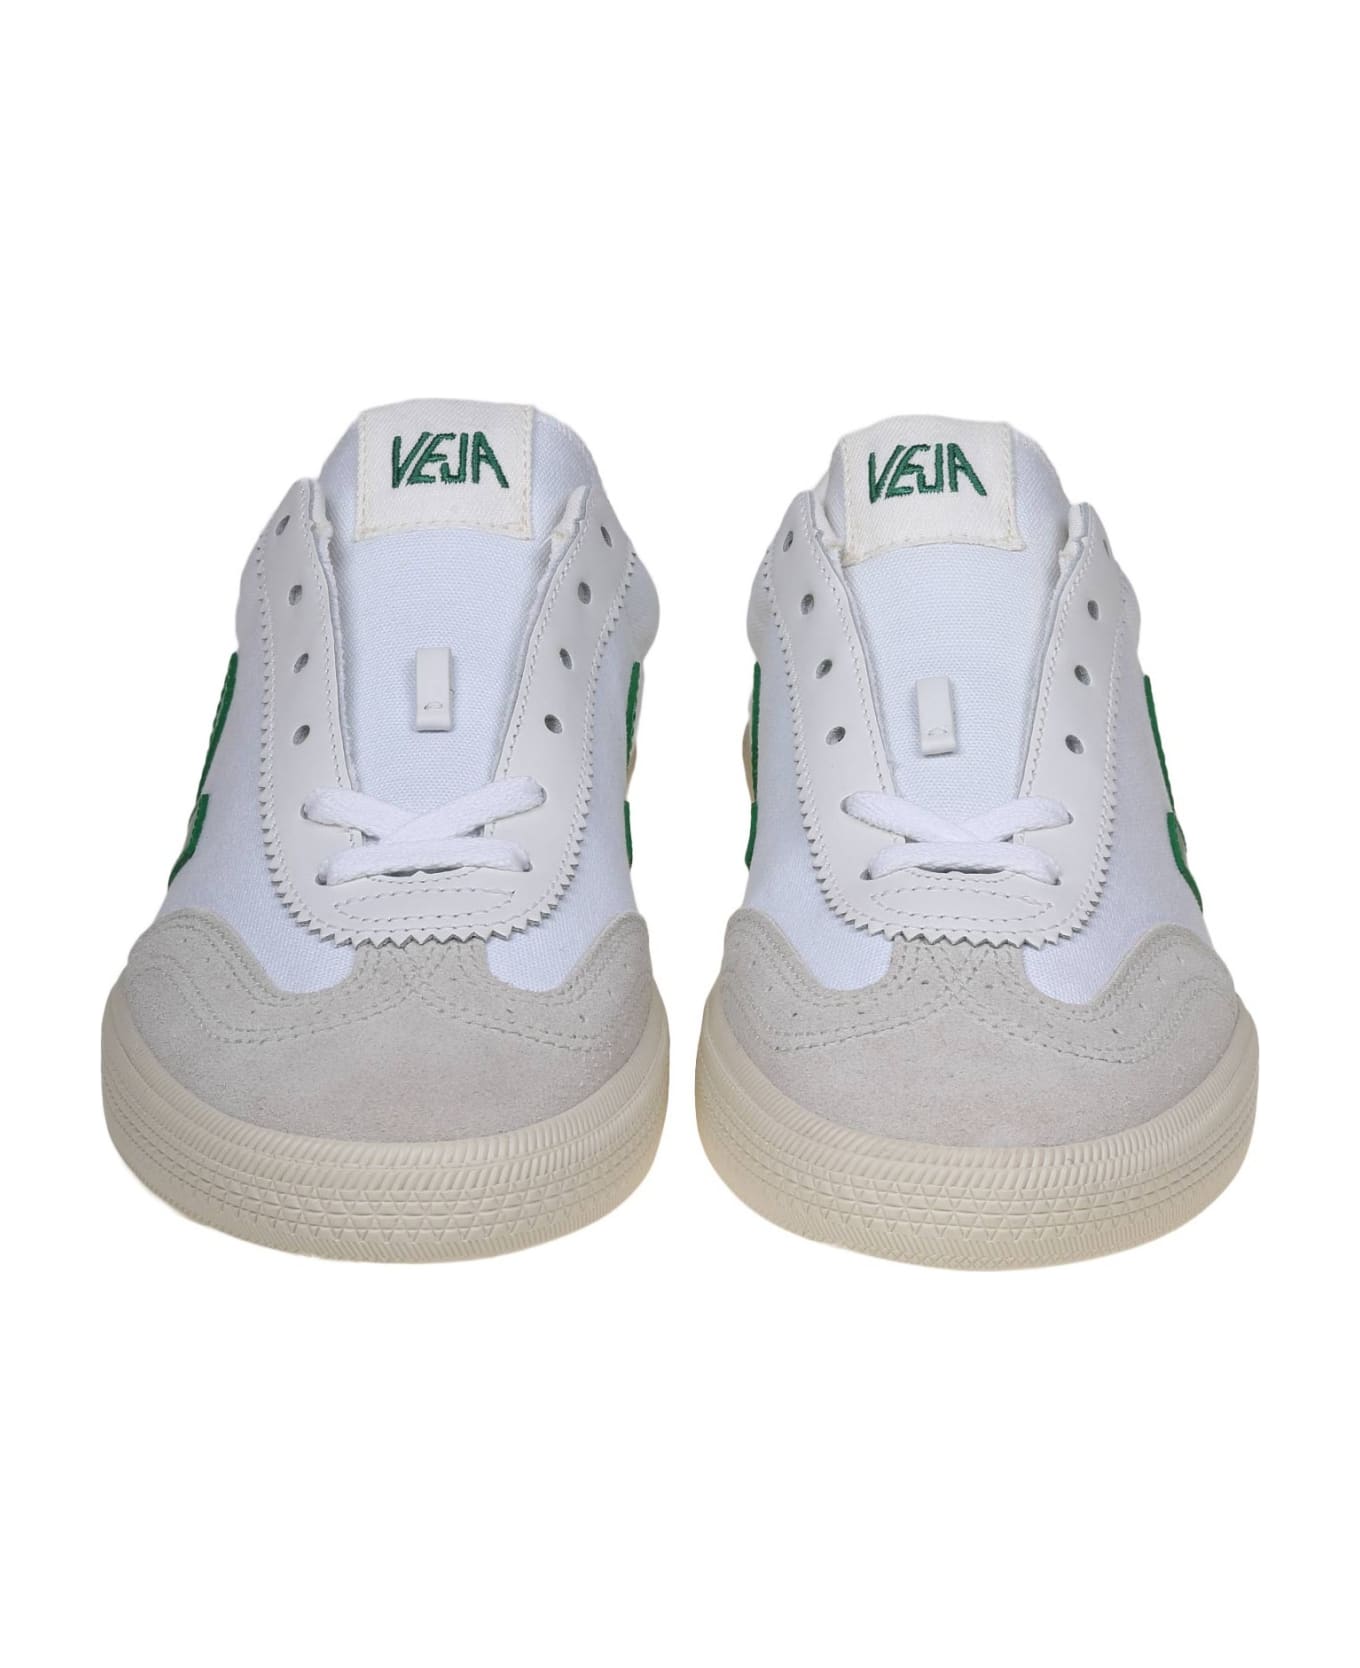 Veja Volley Sneakers In Canvas Color White/green - White/emeraude  スニーカー